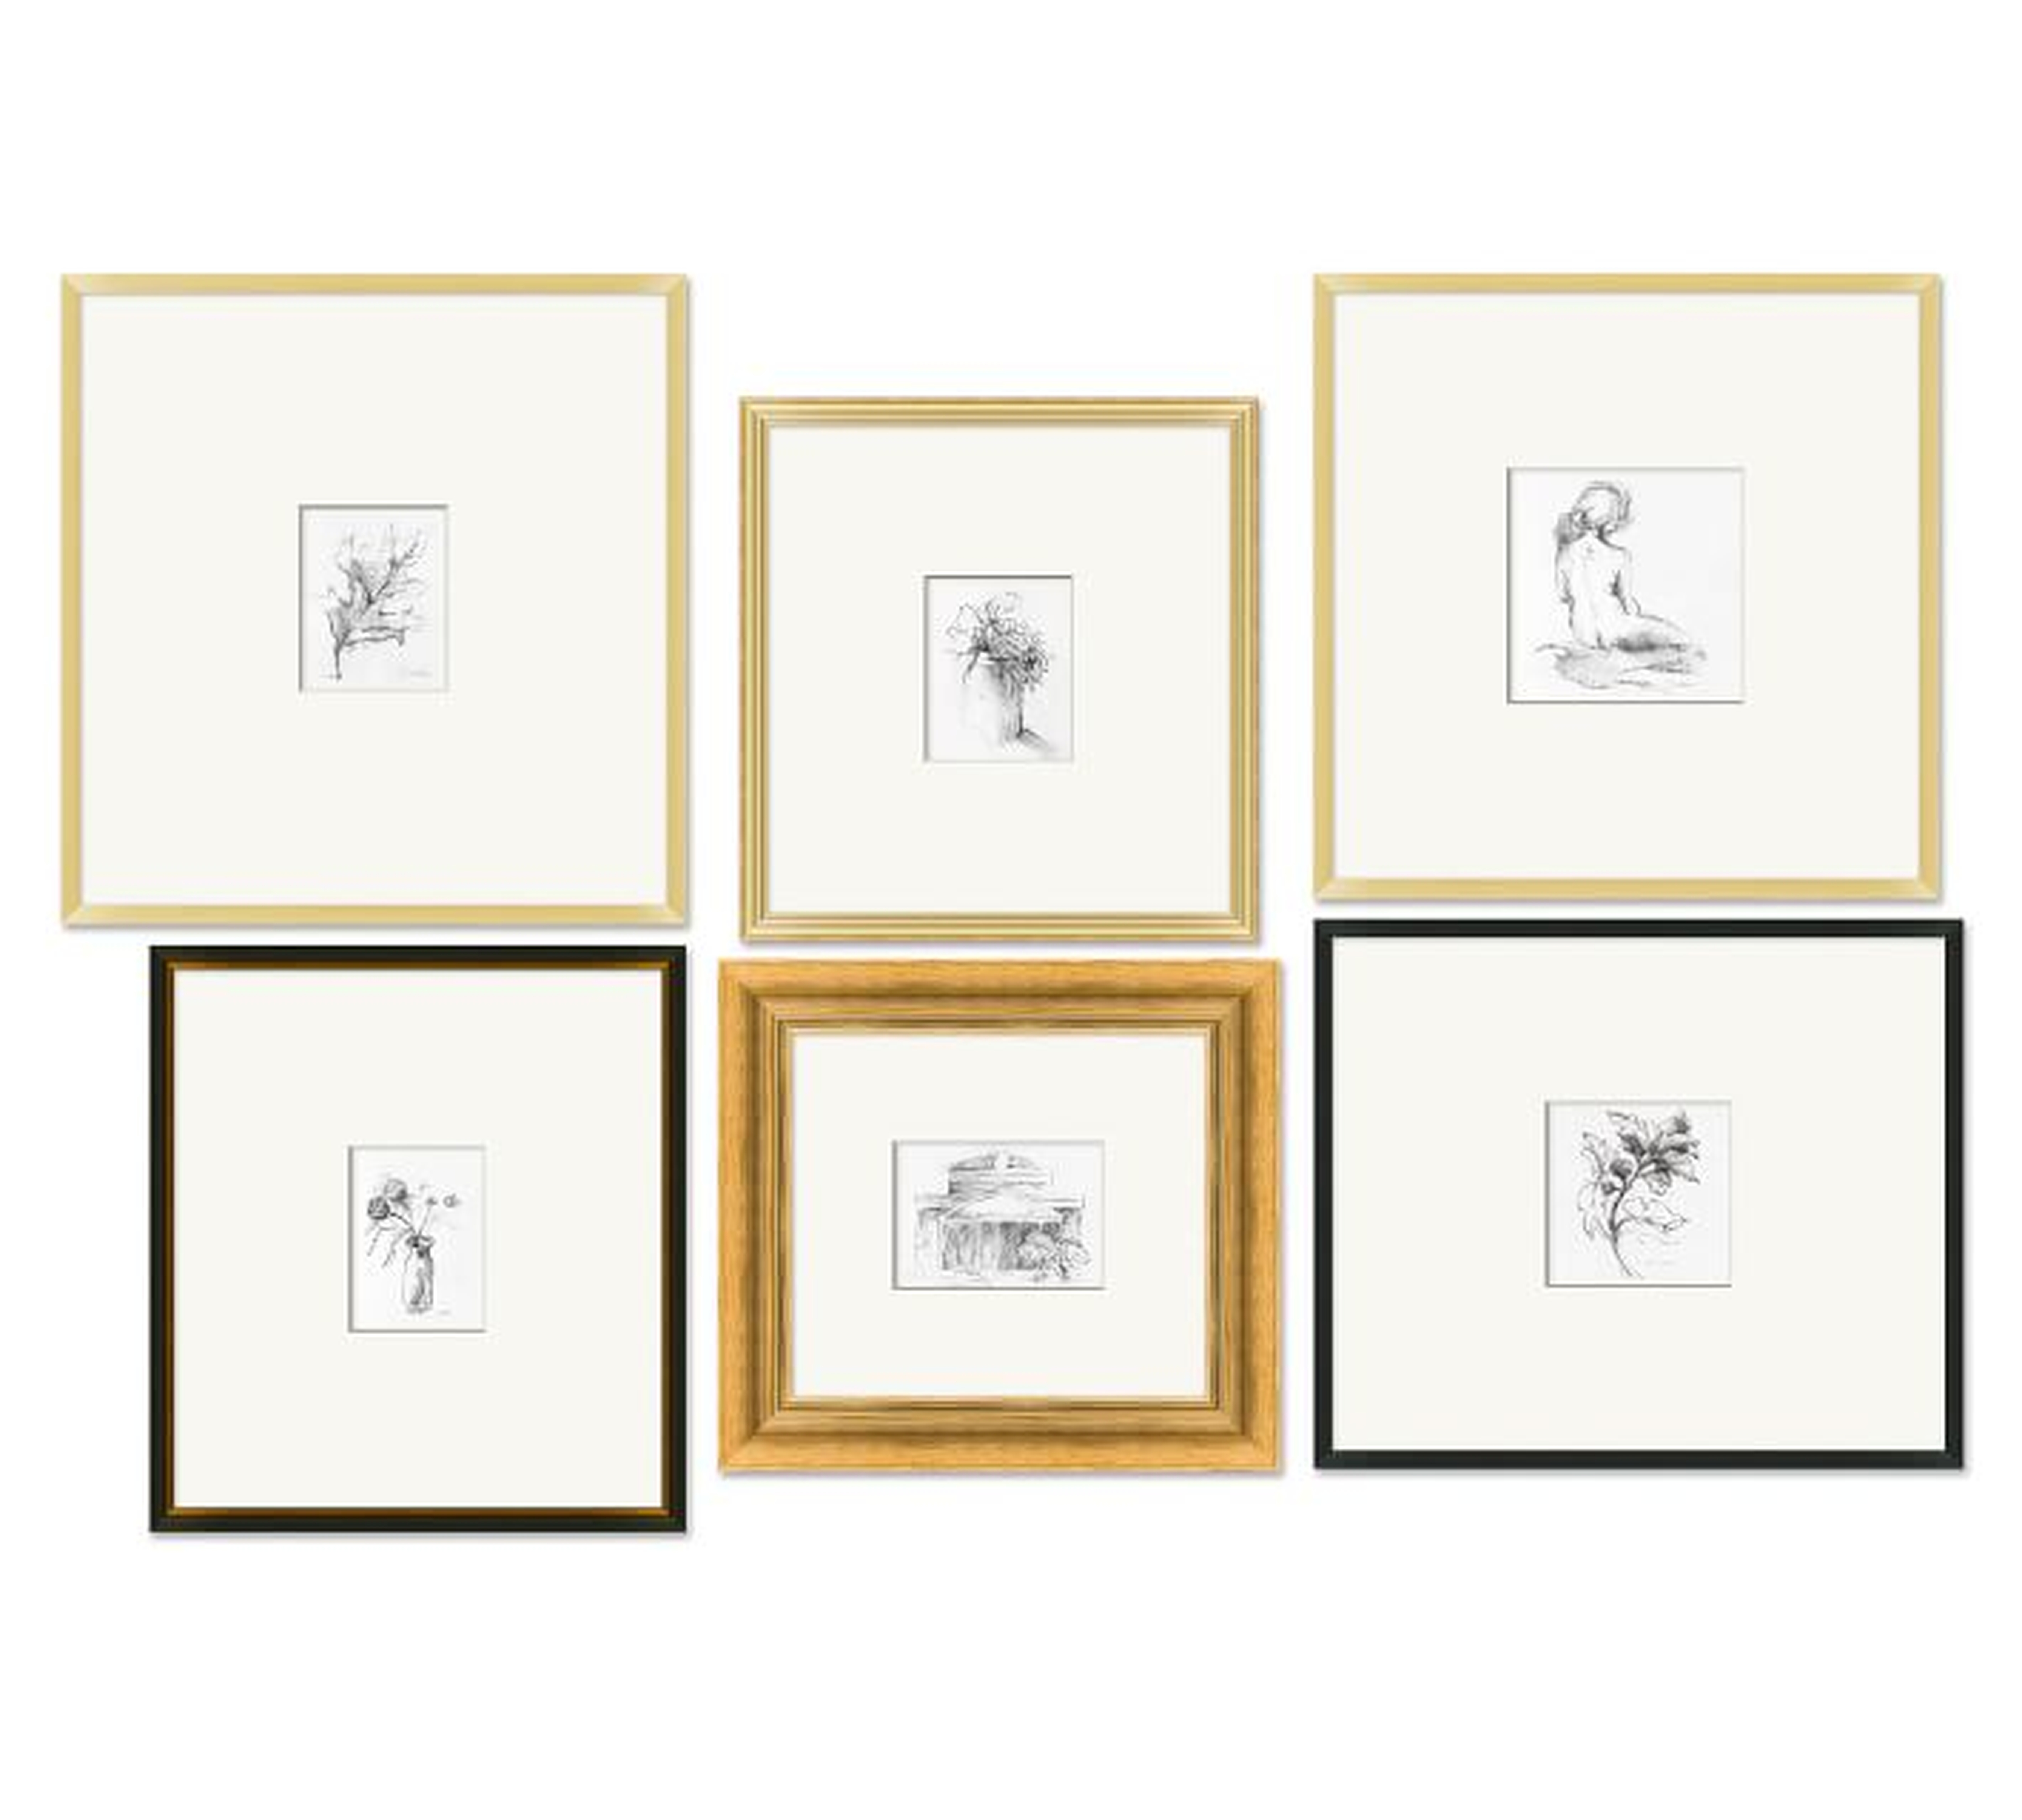 Chateau Gallery Wall Print Collection - 6 pieces - Pottery Barn